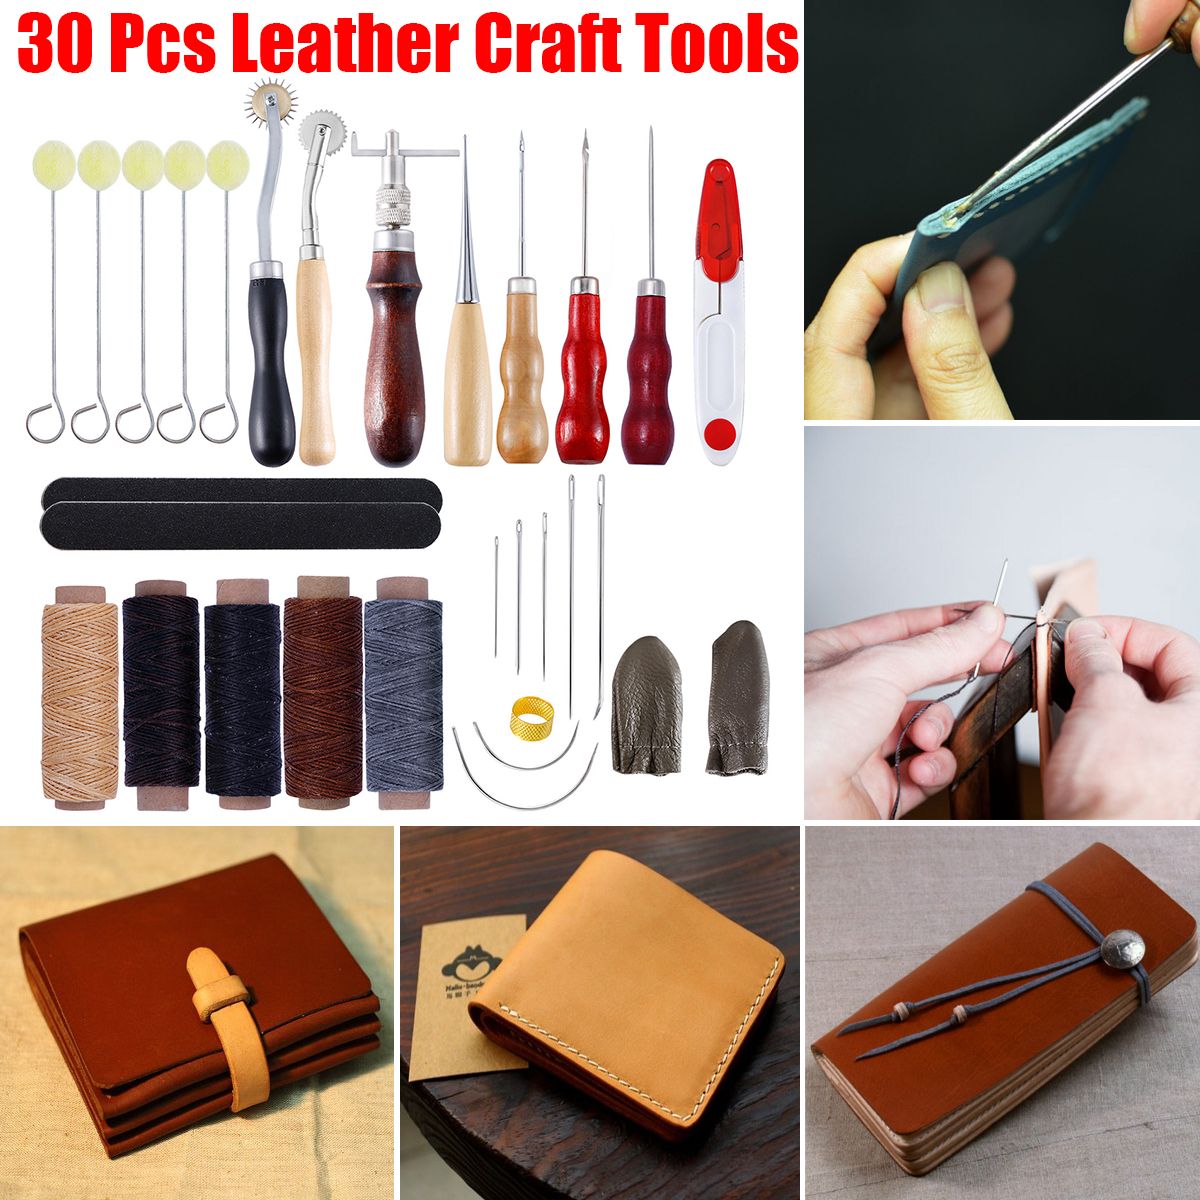 30Pcs-Leather-Craft-Punch-Tools-Kit-Stitching-Carving-Working-Sewing-Saddle-Groover-1631676